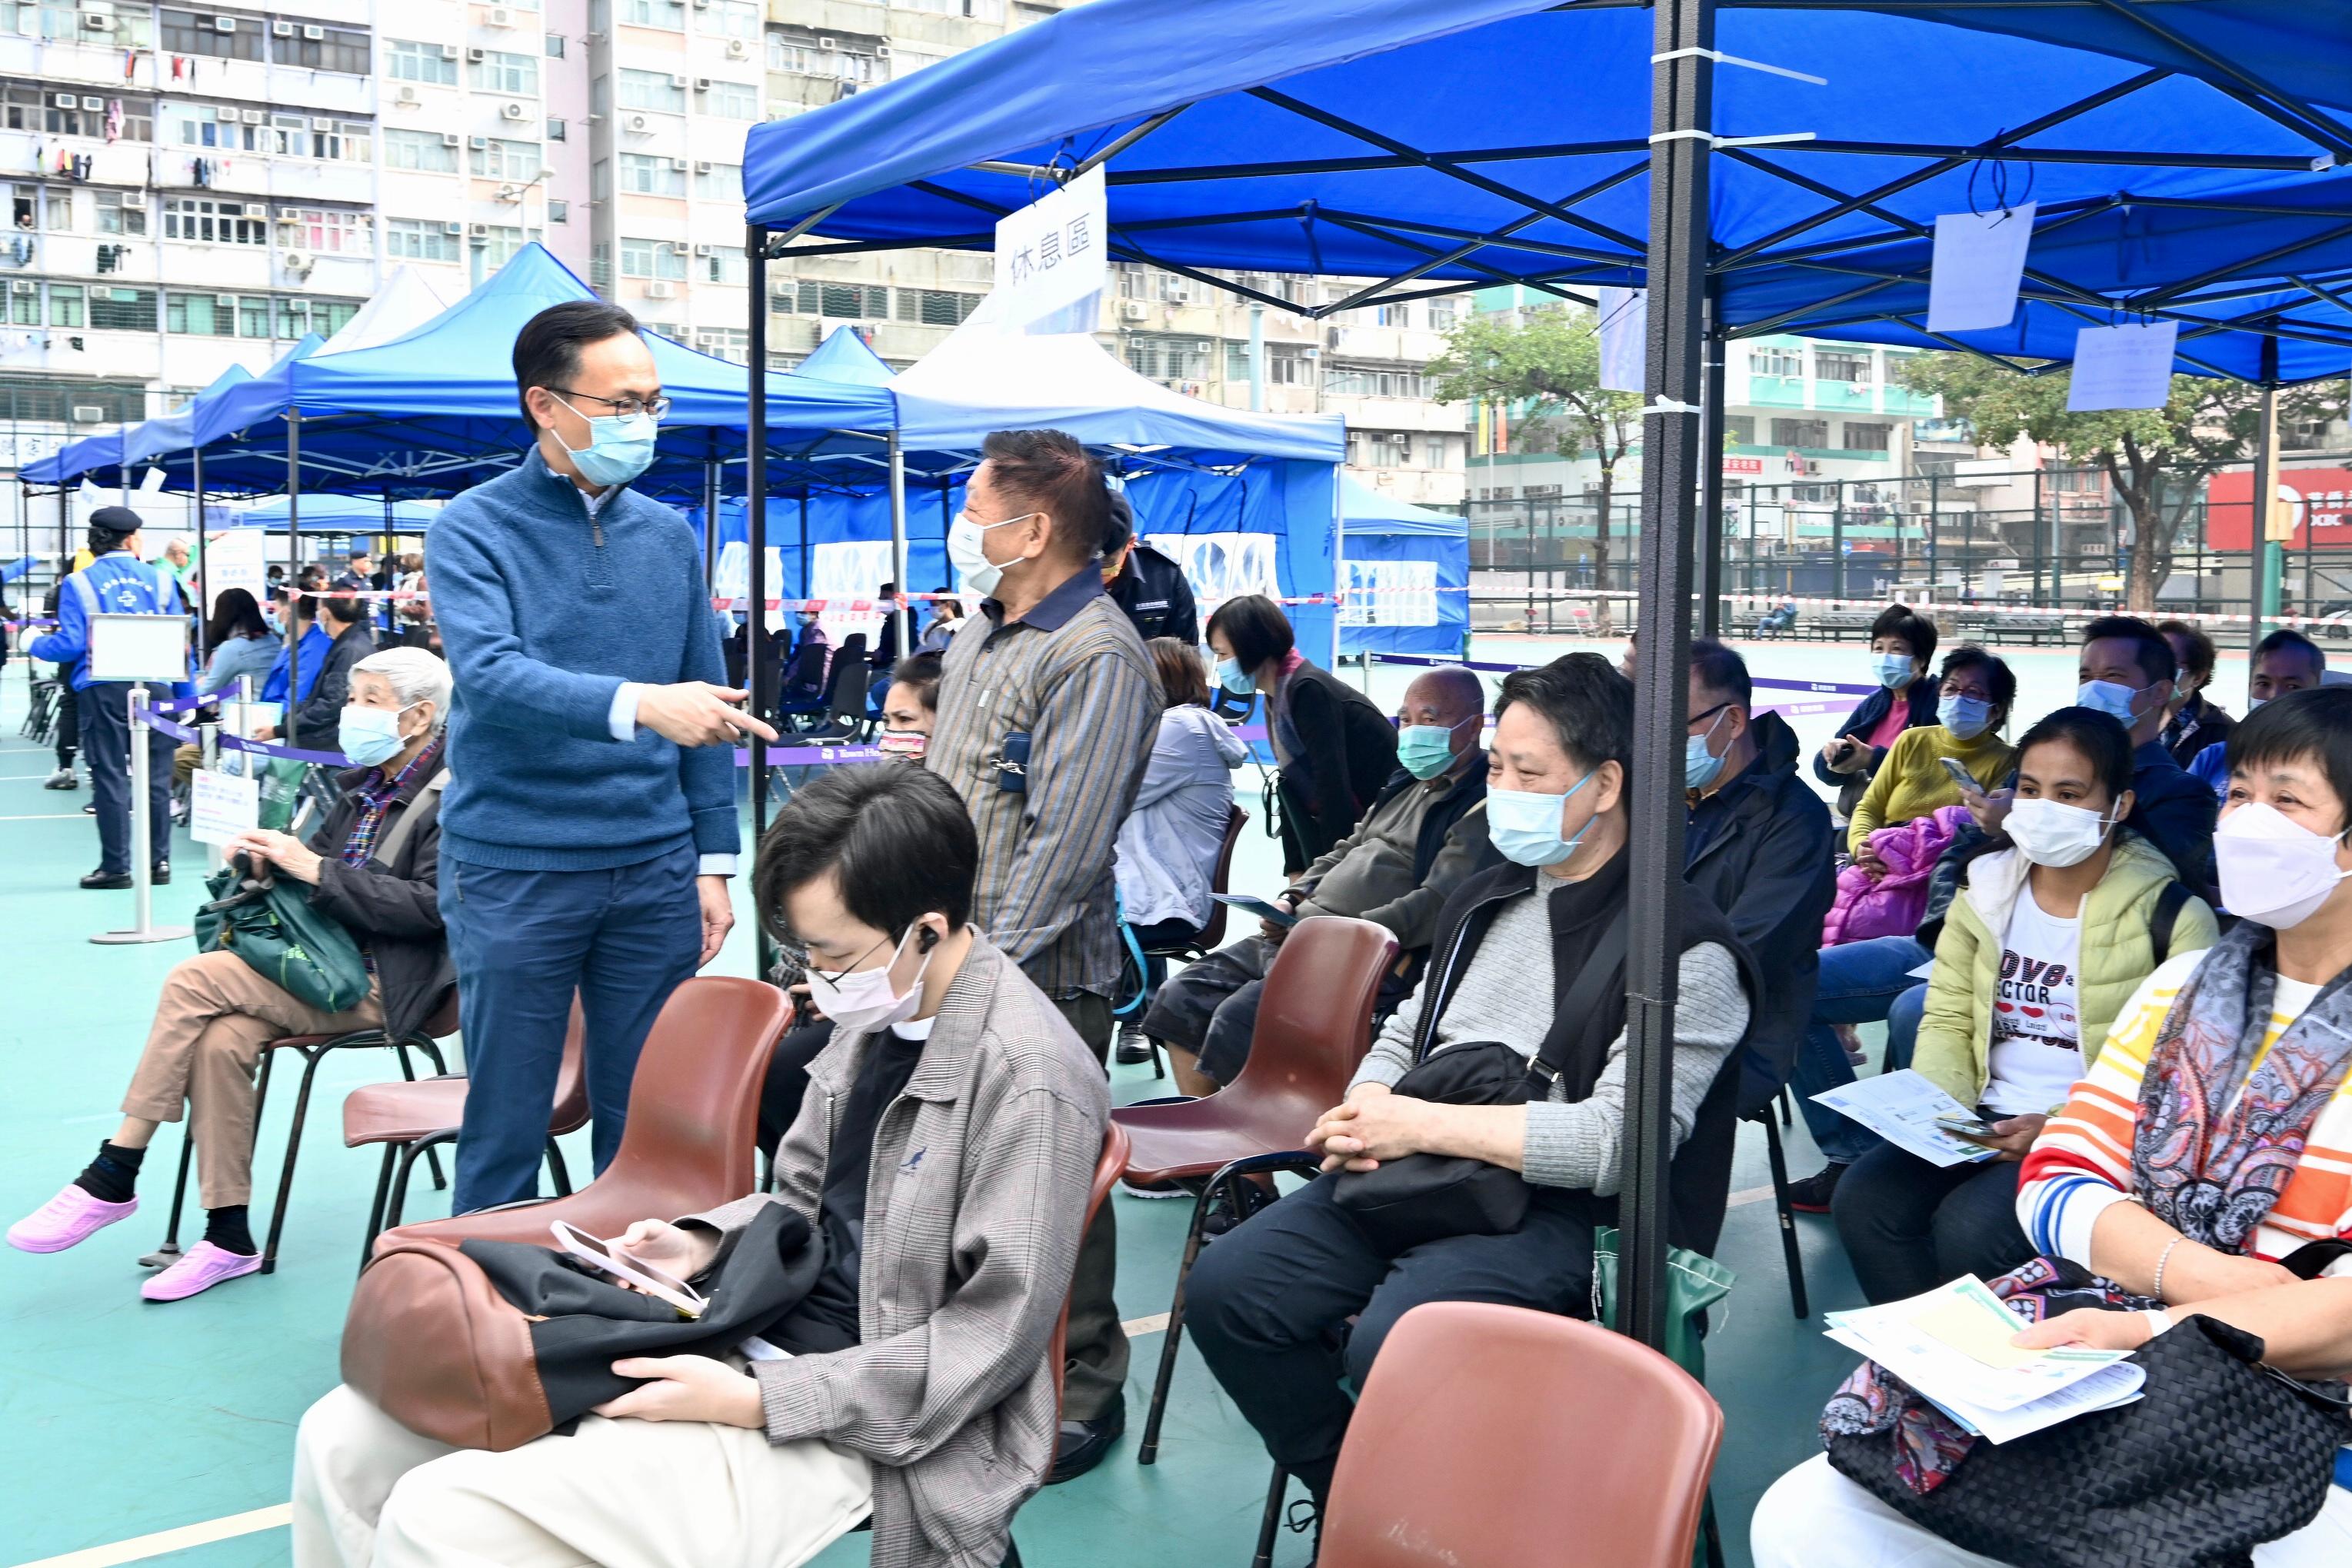 The Secretary for the Civil Service, Mr Patrick Nip, inspected the operation of a COVID-19 Mobile Vaccination Station (MVS) at Maple Street Playground in Sham Shui Po today (January 15) to learn more about the public's views on the MVS. Photo shows Mr Nip (second left) chatting with a member of the public after he received the COVID-19 vaccine.